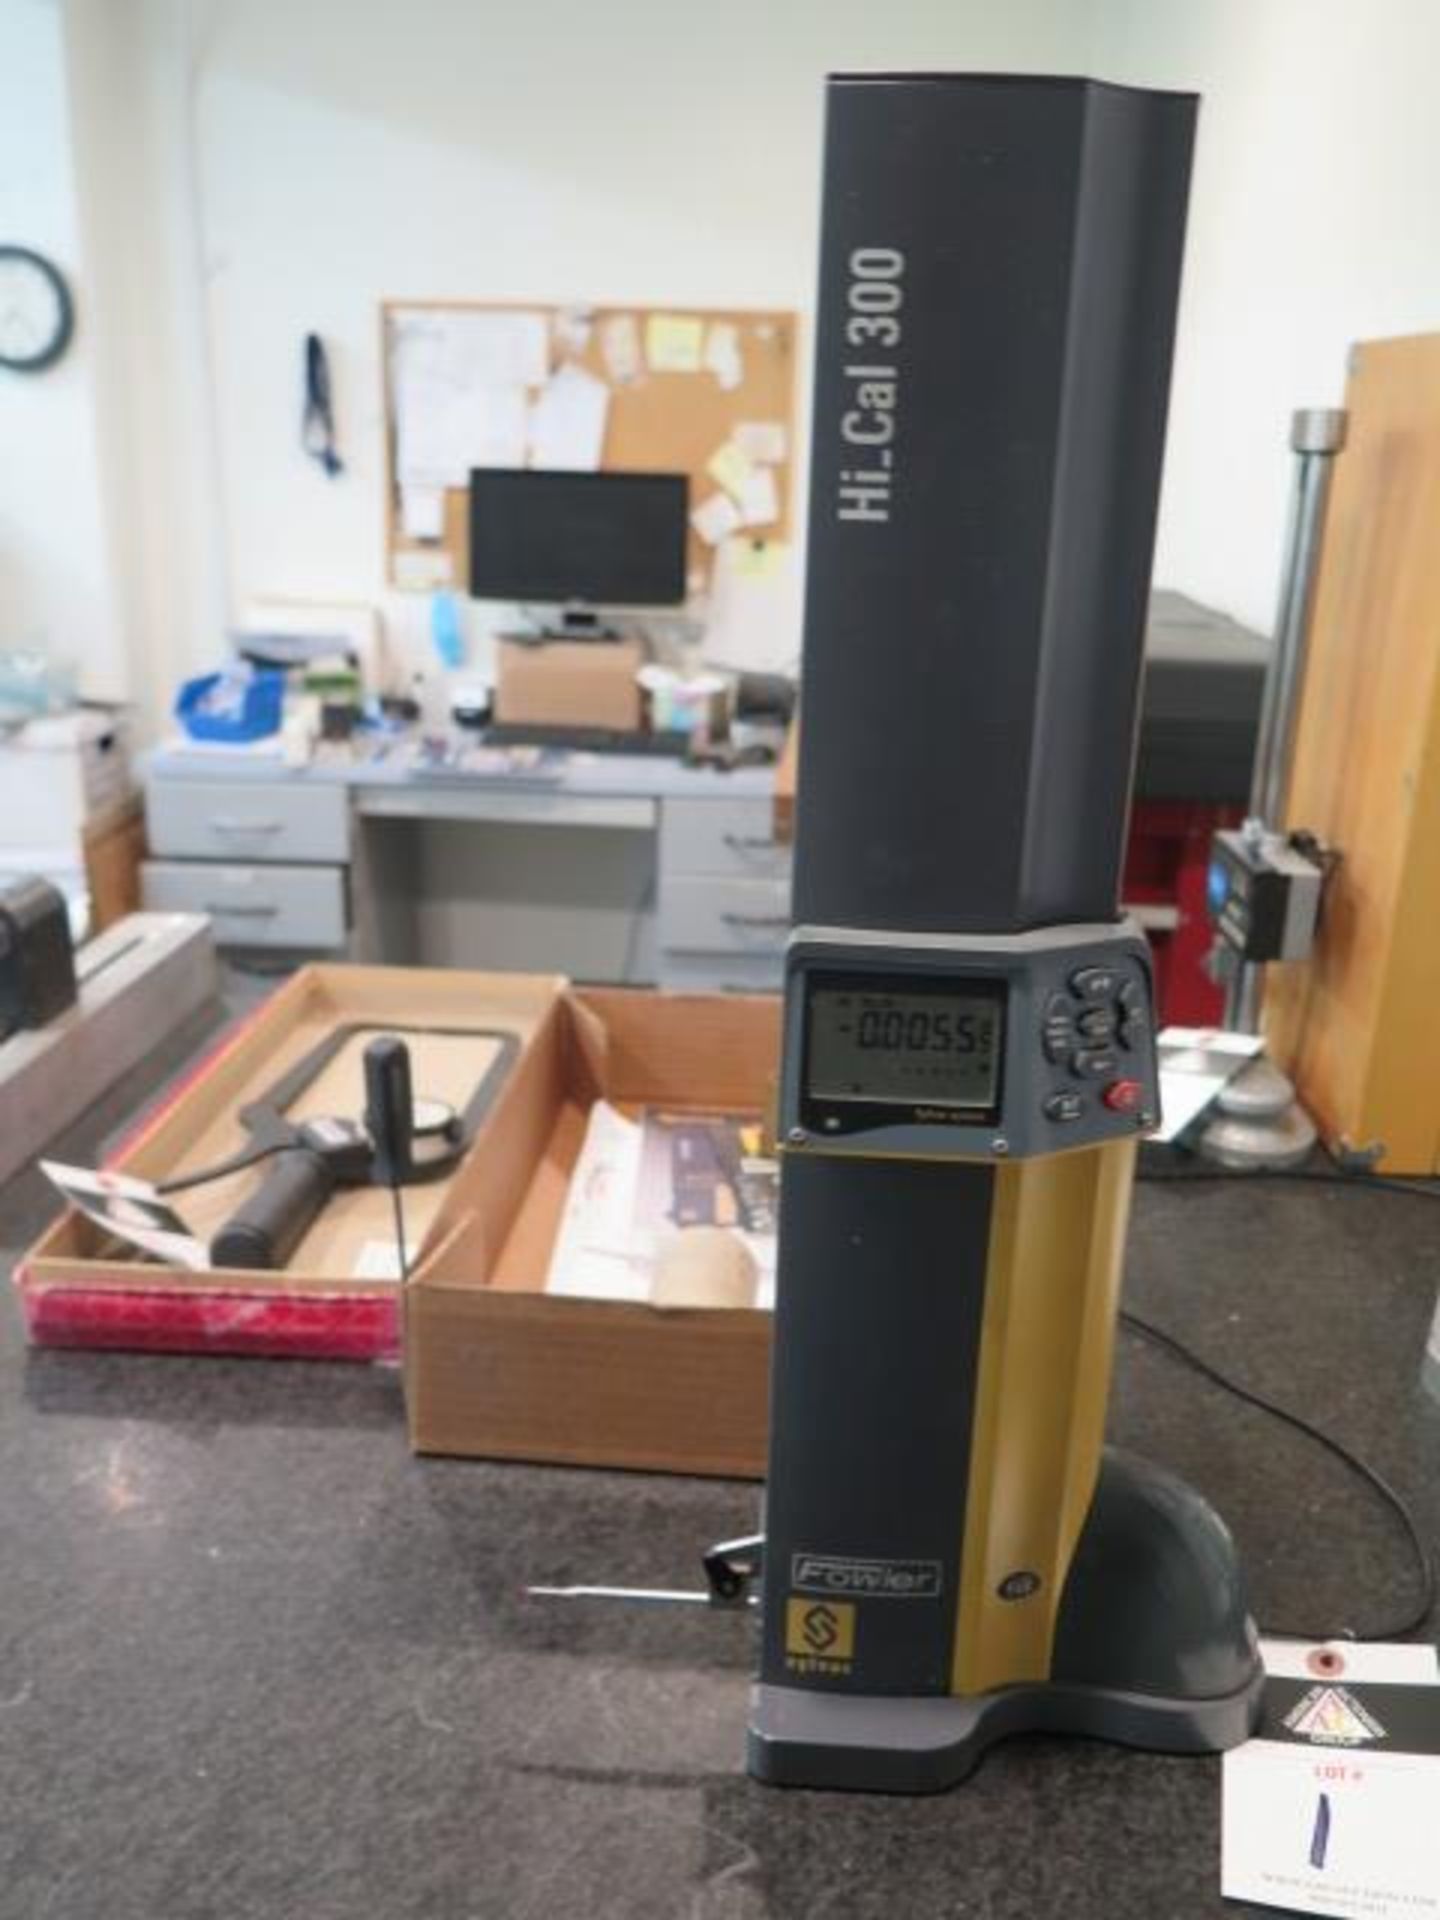 Fowler Sylvac Hi-Cal 300 Digital Height Gage (SOLD AS-IS - NO WARRANTY) - Image 2 of 7